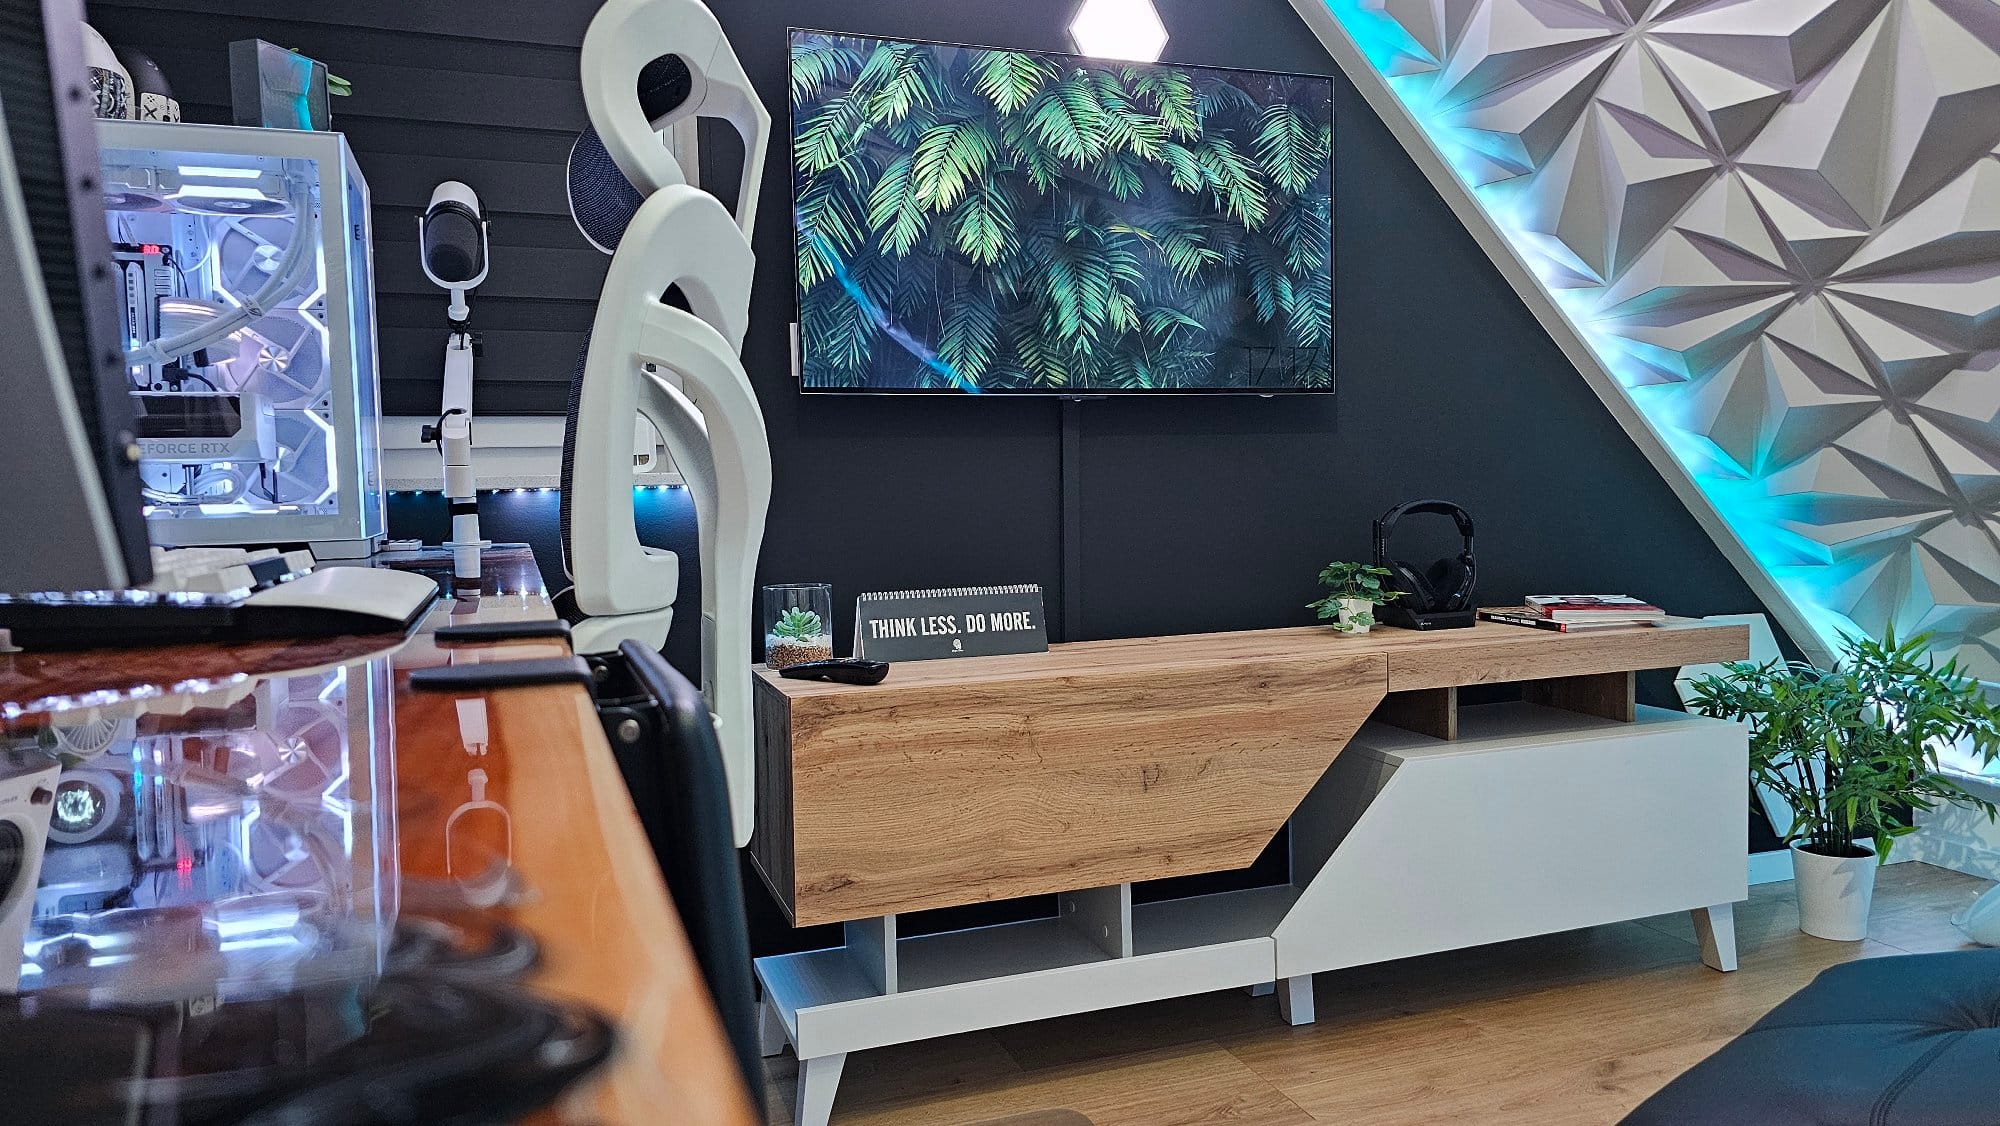 A corner view of a contemporary home office, showcasing a sleek wooden desk with a motivational desk plaque, ambient-lit geometric wall panels, and a mounted TV with a nature-themed display